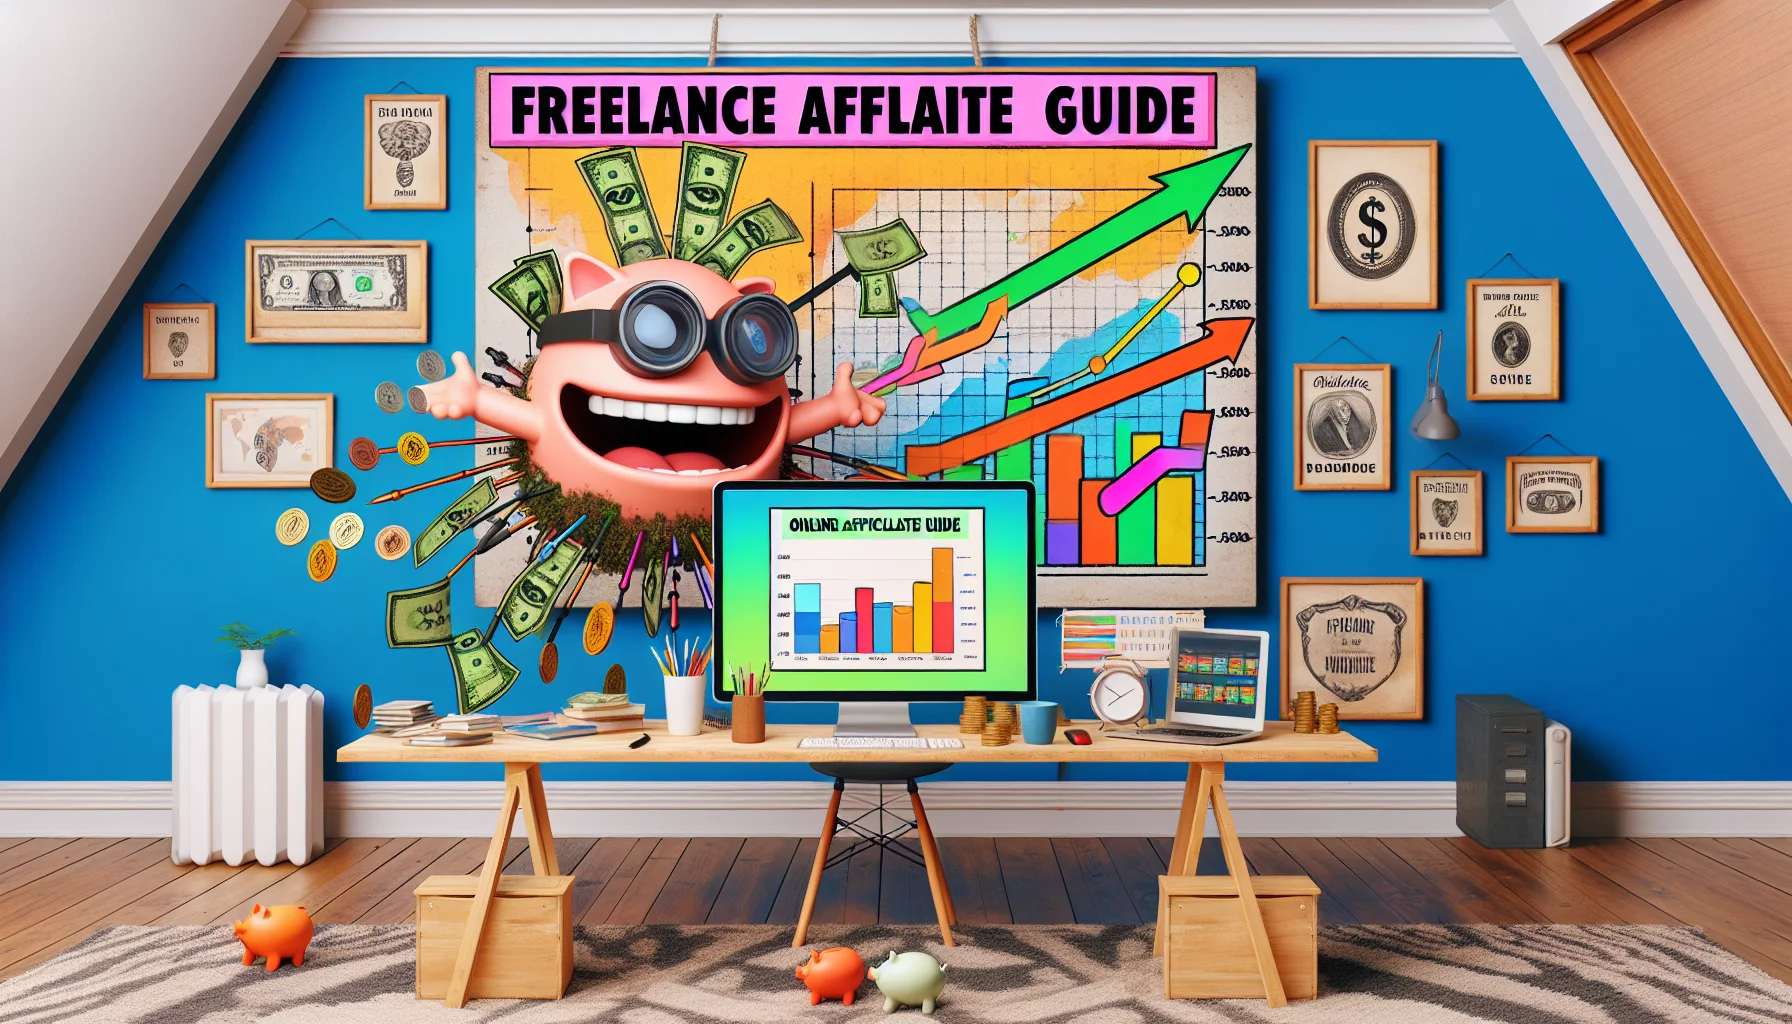 Imagine a humorous, realistic setup related to online income generation. The center of this scene is a colorful infographic - a 'Freelance Affiliate Guide'. This guide is animated and bears a wide grin, enthusiastically pointing towards a chart showing rising revenues. It's surrounded by a typical home setting, symbolizing a home office. Around the guide, imagine several visual metaphors associated with internet moneymaking - a laptop spewing out coins, an elaborate network of wires linking to piggy banks. On the background wall, hang a few frames depicting currency signs from around the world for an international touch.